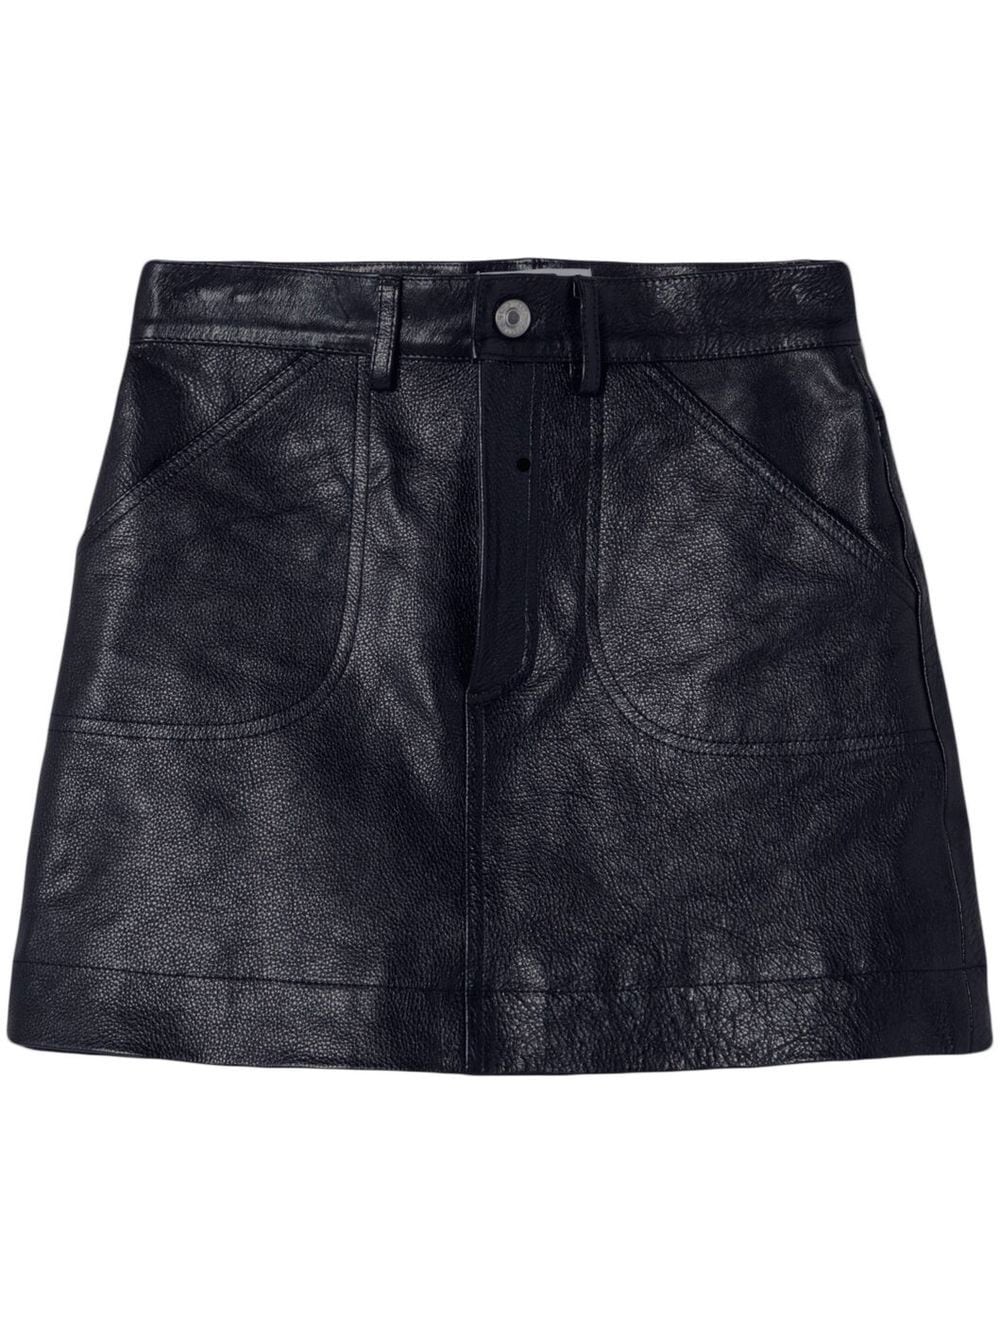 RE/DONE 70s leather mini skirt - Black von RE/DONE